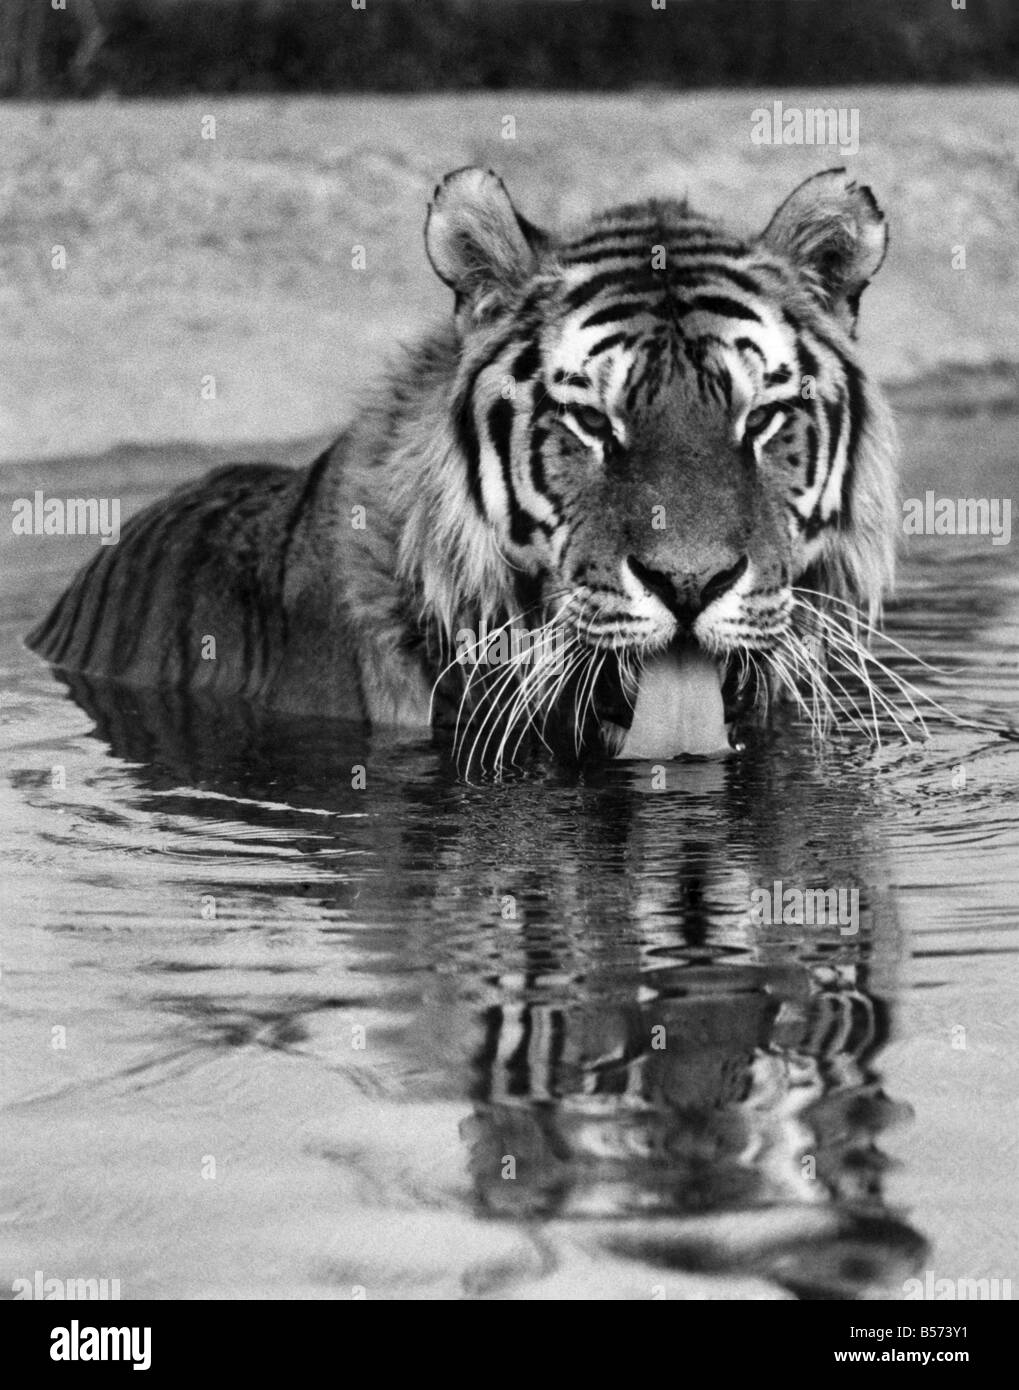 The heatwave has hit the inhabitants of Marwell Zoological Park, Hats just as much as everywhere else. Some of the animals can cope with the heat, but others like the Sibarian Tigar have to resort to drastic measures like sitting for a bath of cold water up to its neck. 'Kurtun' the largest of the Siberian Tigers is 7 years old and the father of cubs born at Marwell Zoo. June 1976 P004216 Stock Photo